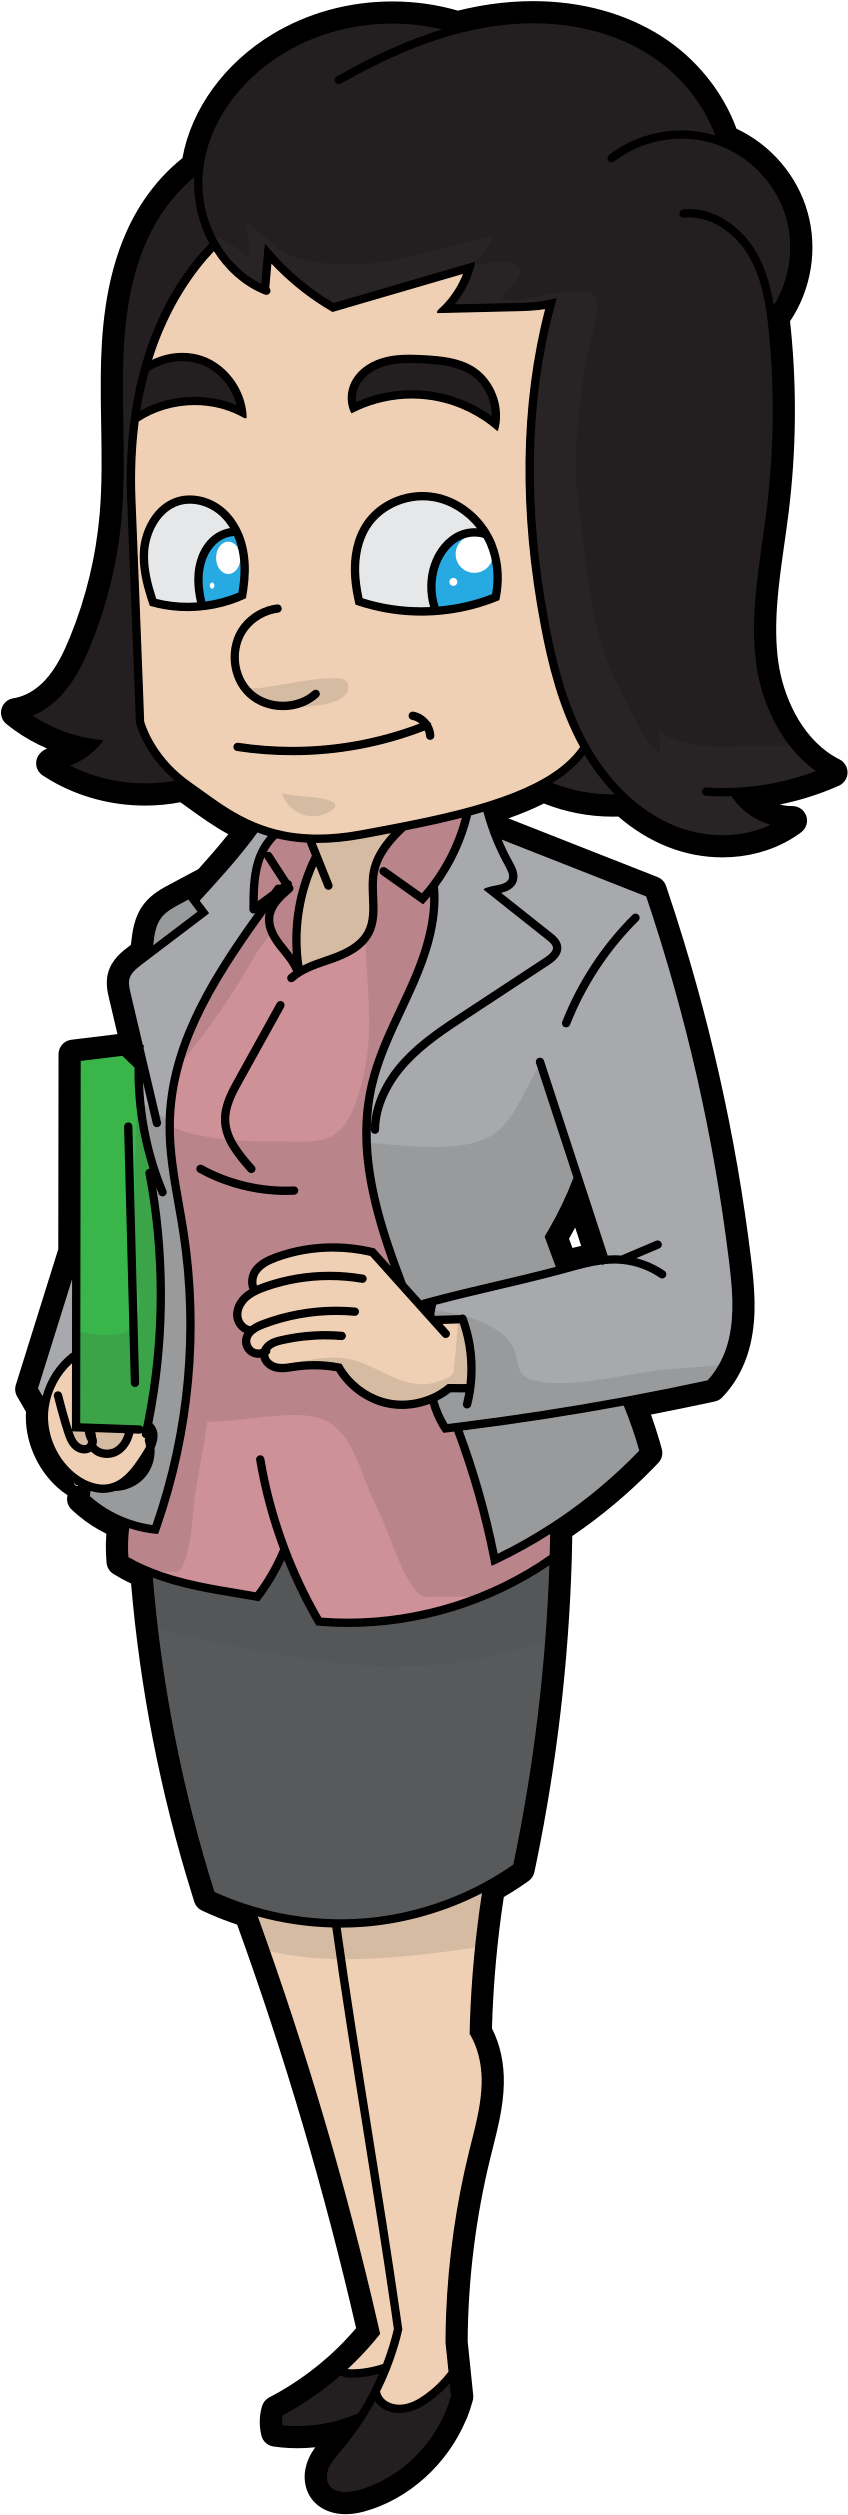 A Cartoon Of A Woman Holding A Green Object